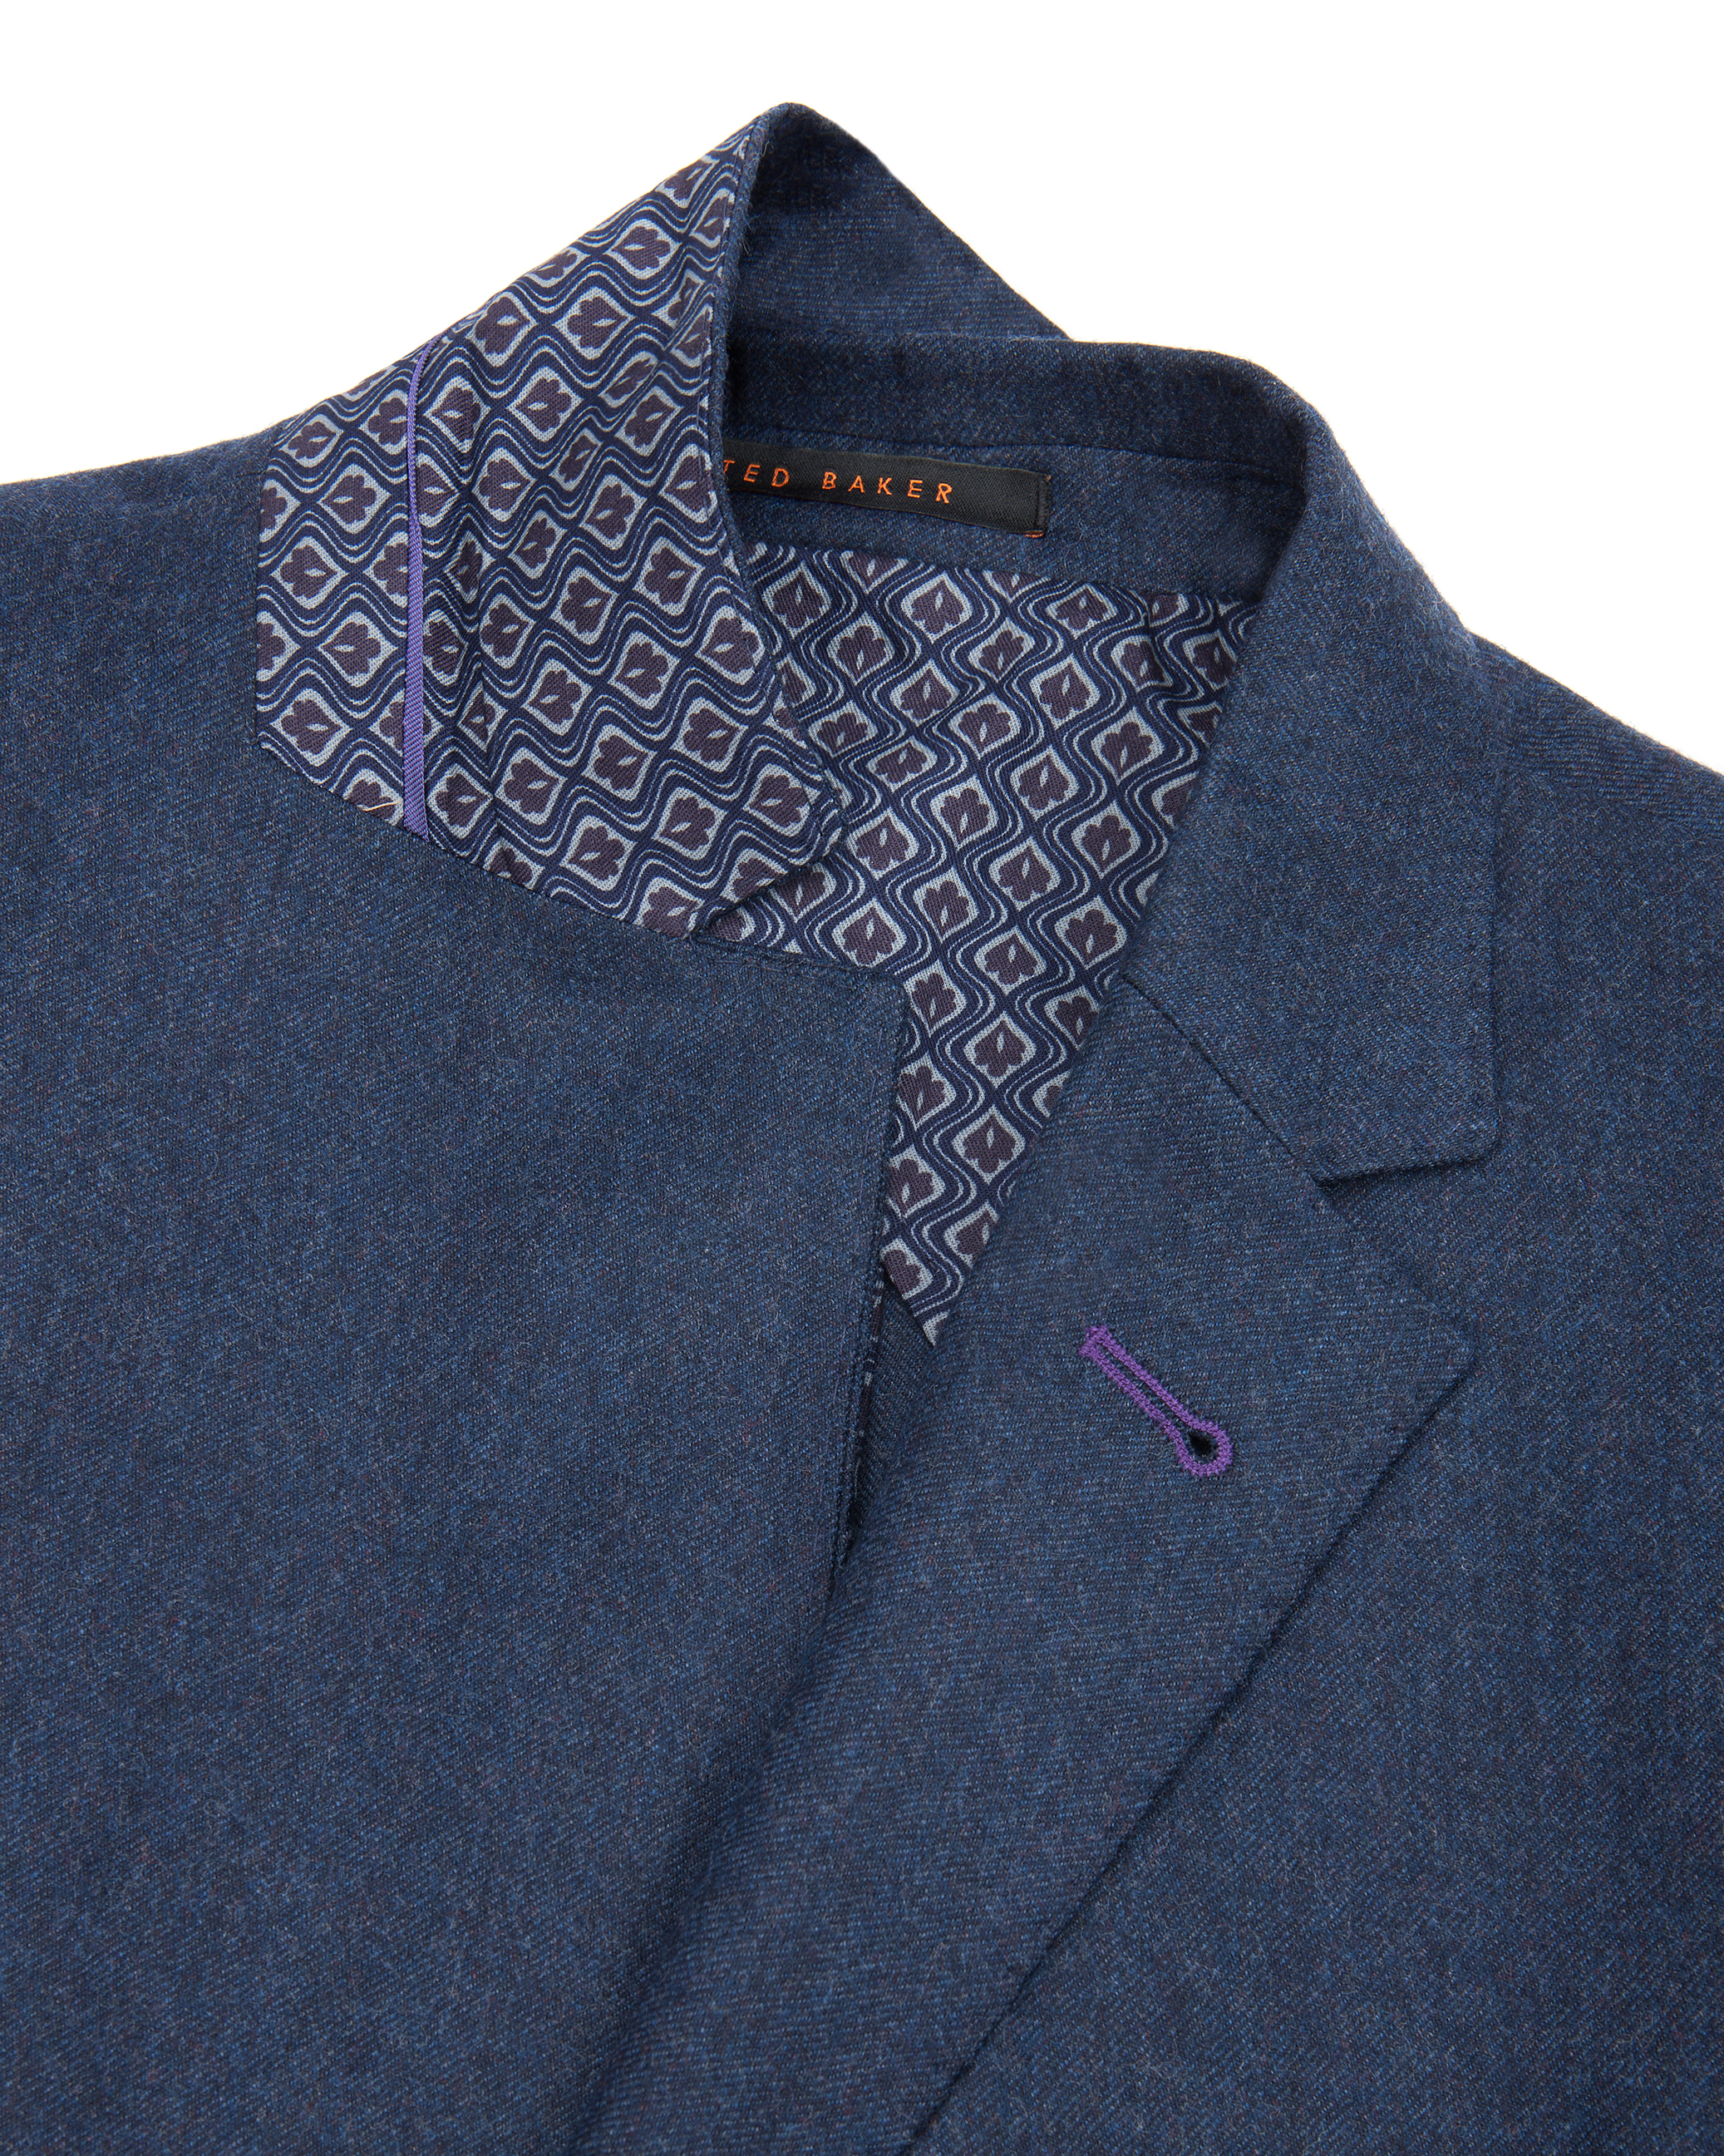 Ted Baker collection - Blue | Suits | Baker